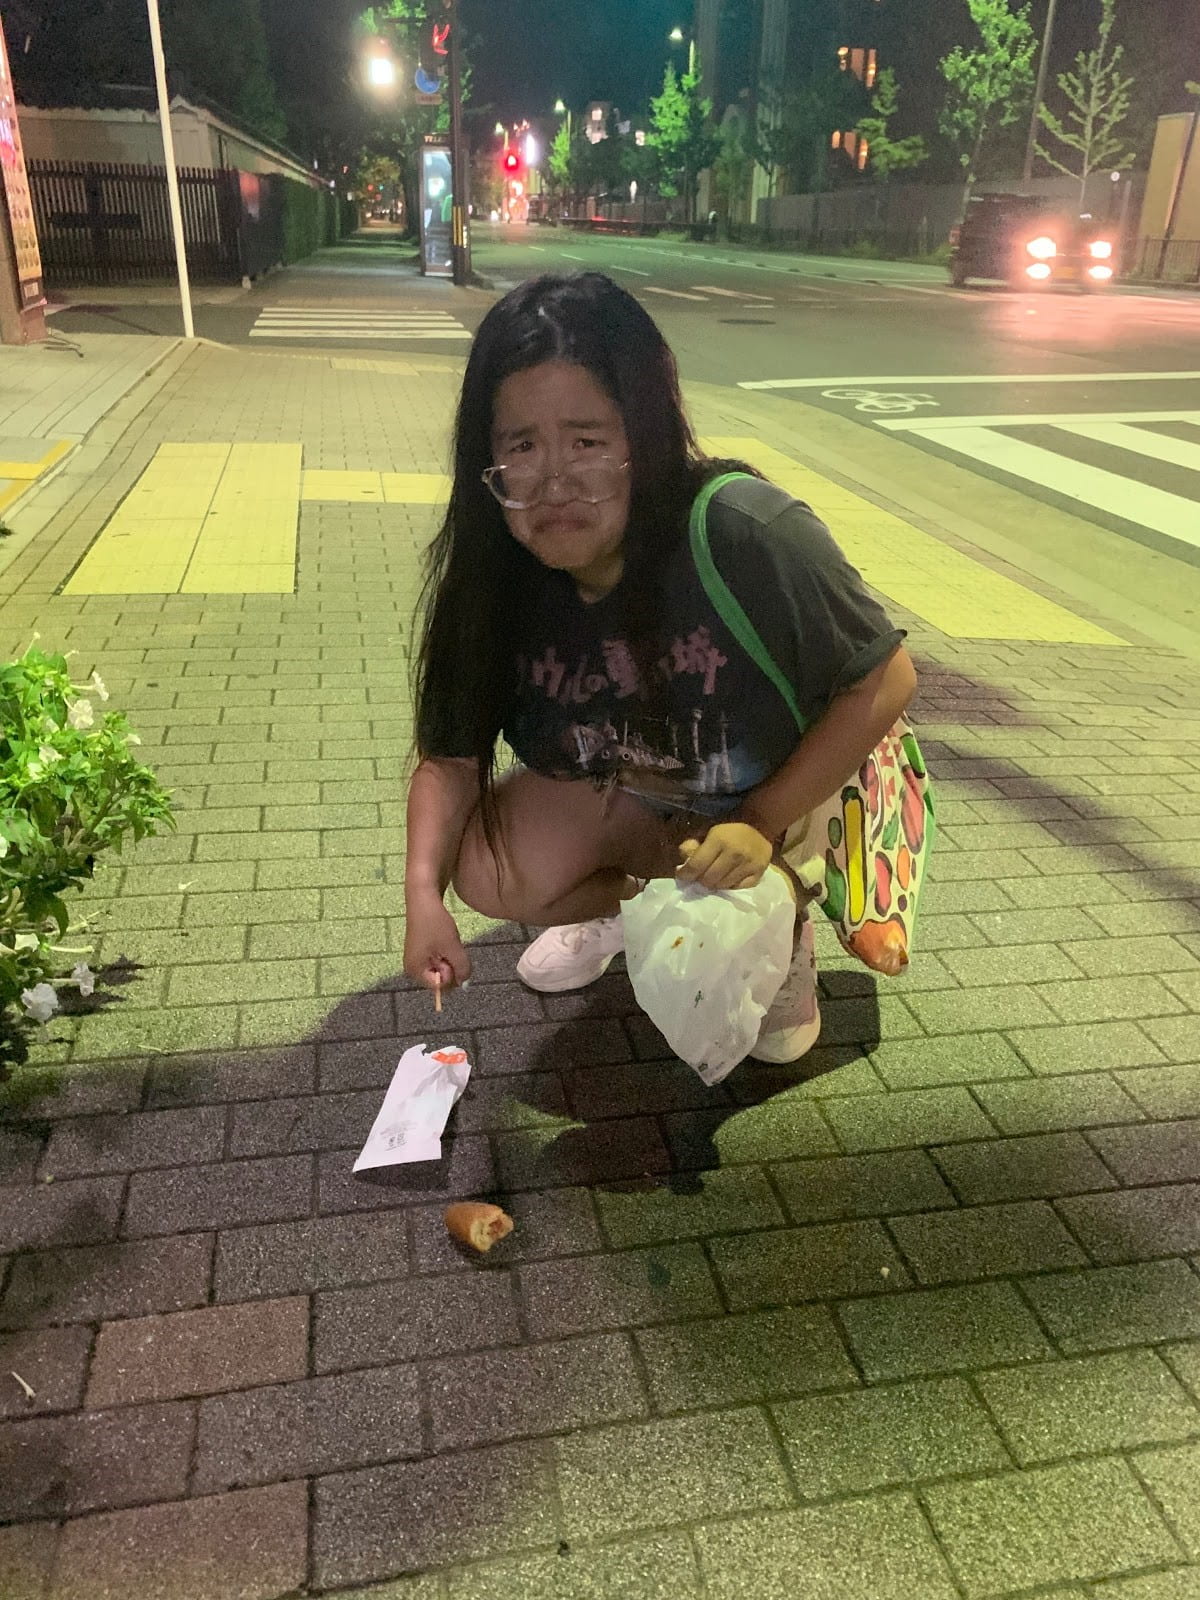 Cy makes a sad face after dropping her hot dog